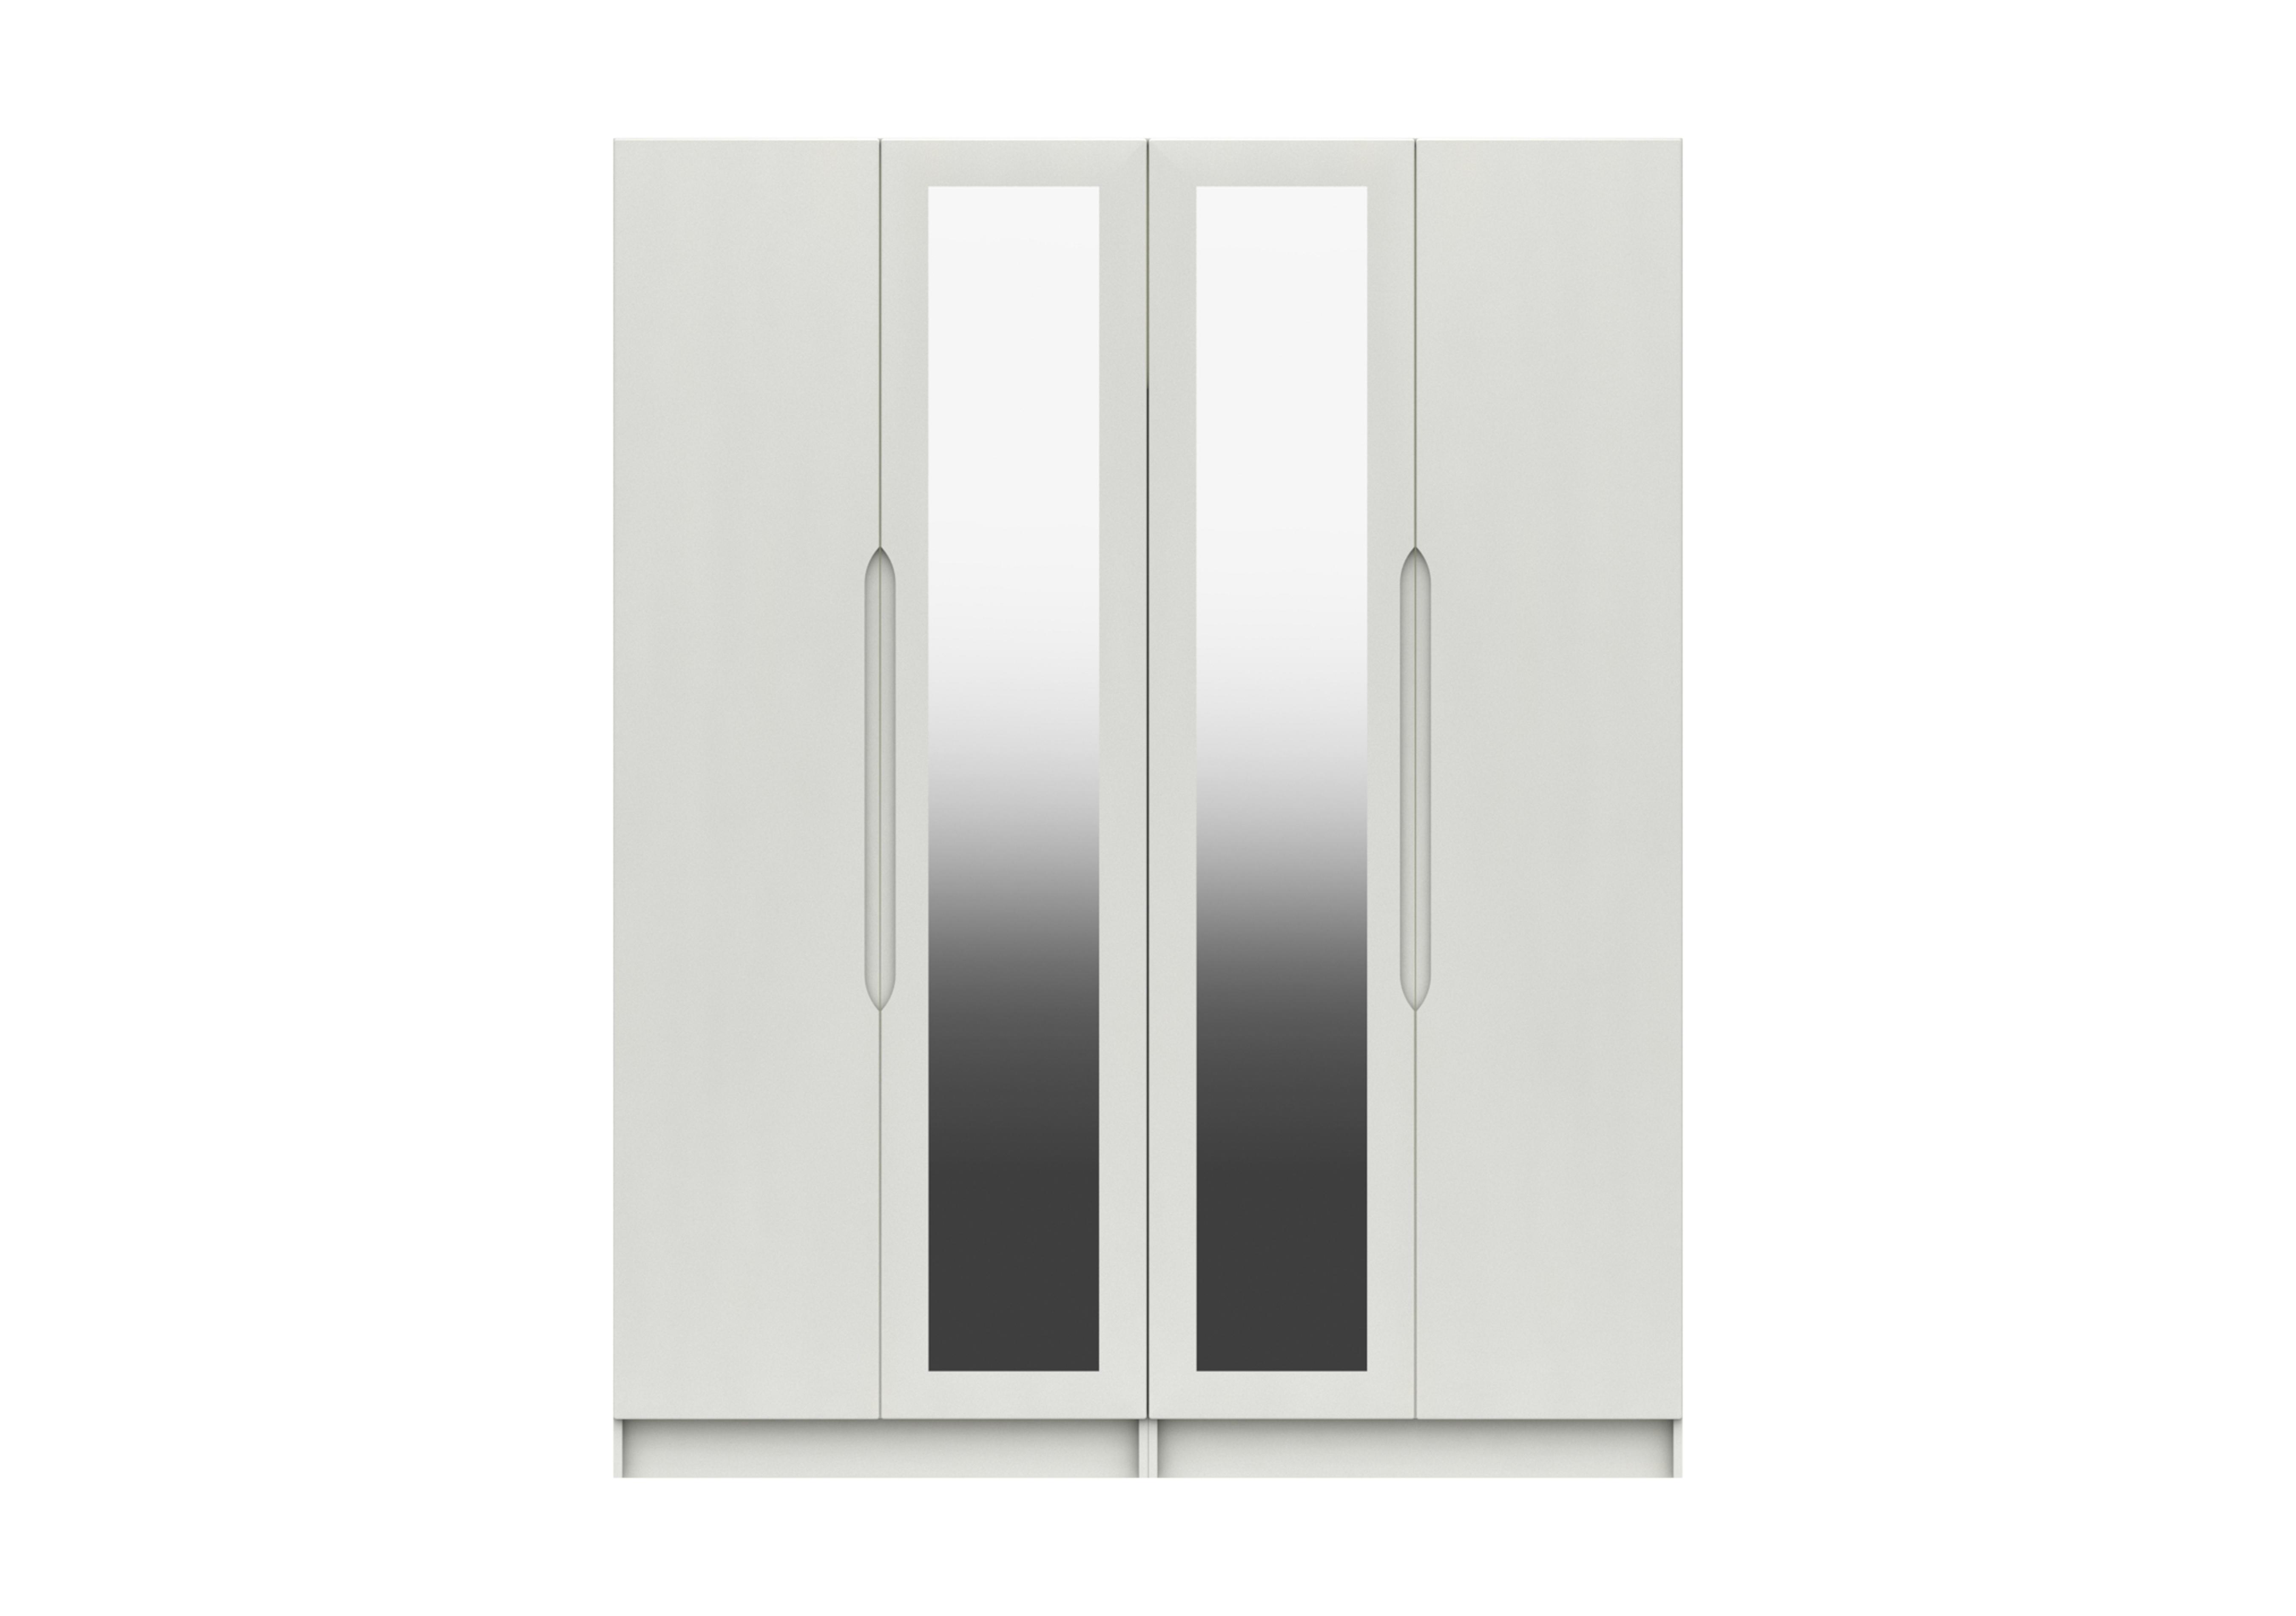 St Pancras 4 Door Tall Wardrobe with 2 Mirrors in White Gloss on Furniture Village